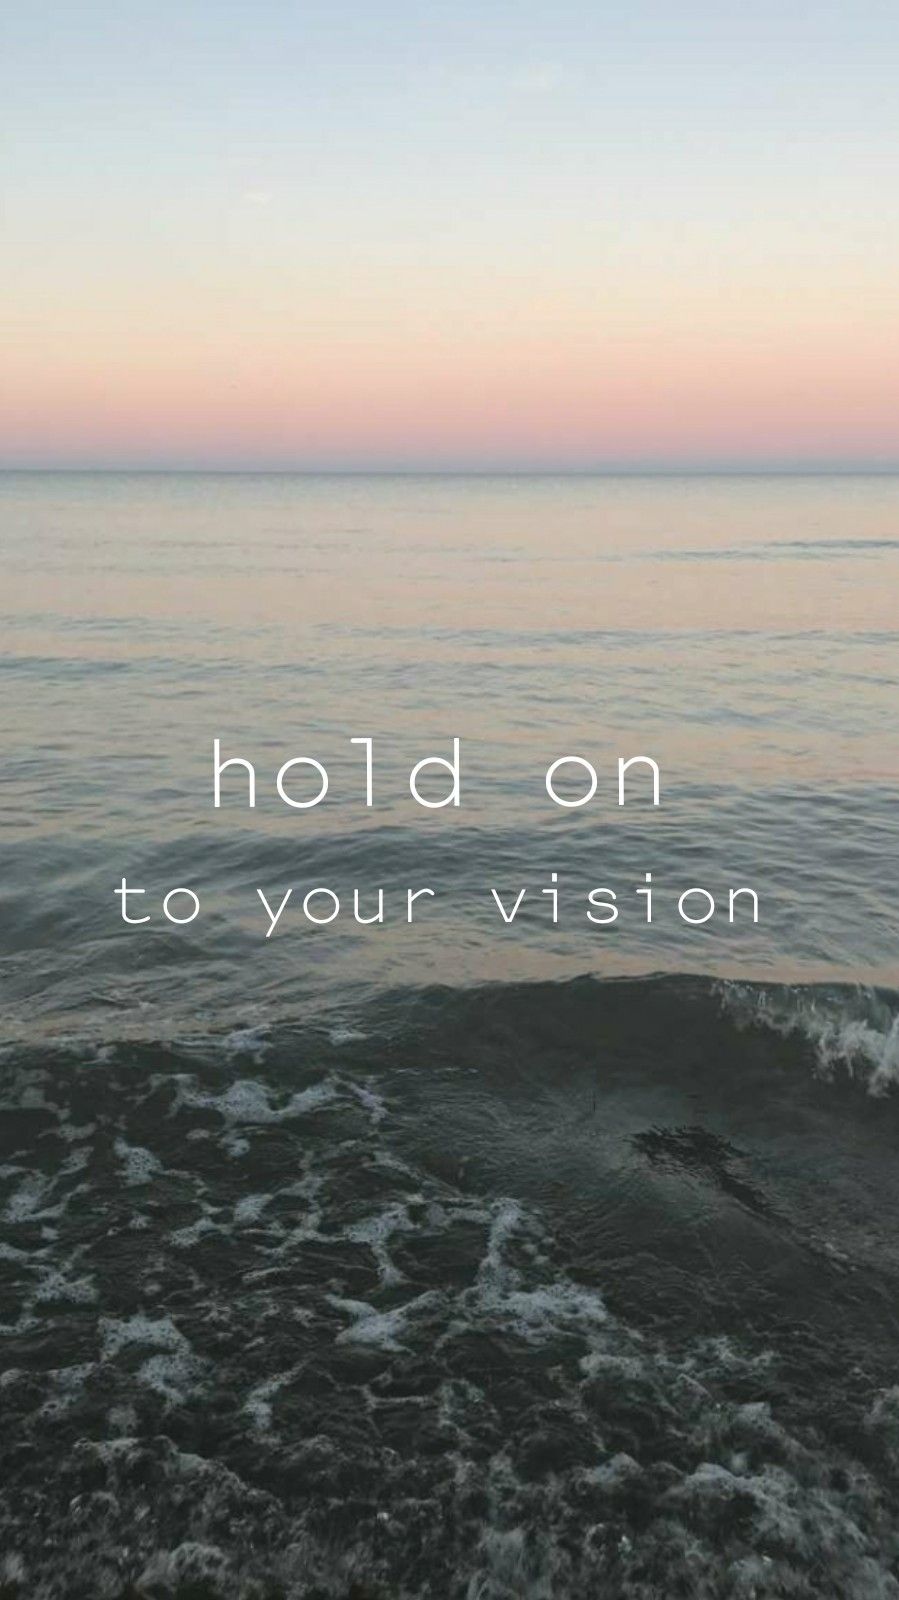 Hold on to your vision - Motivational